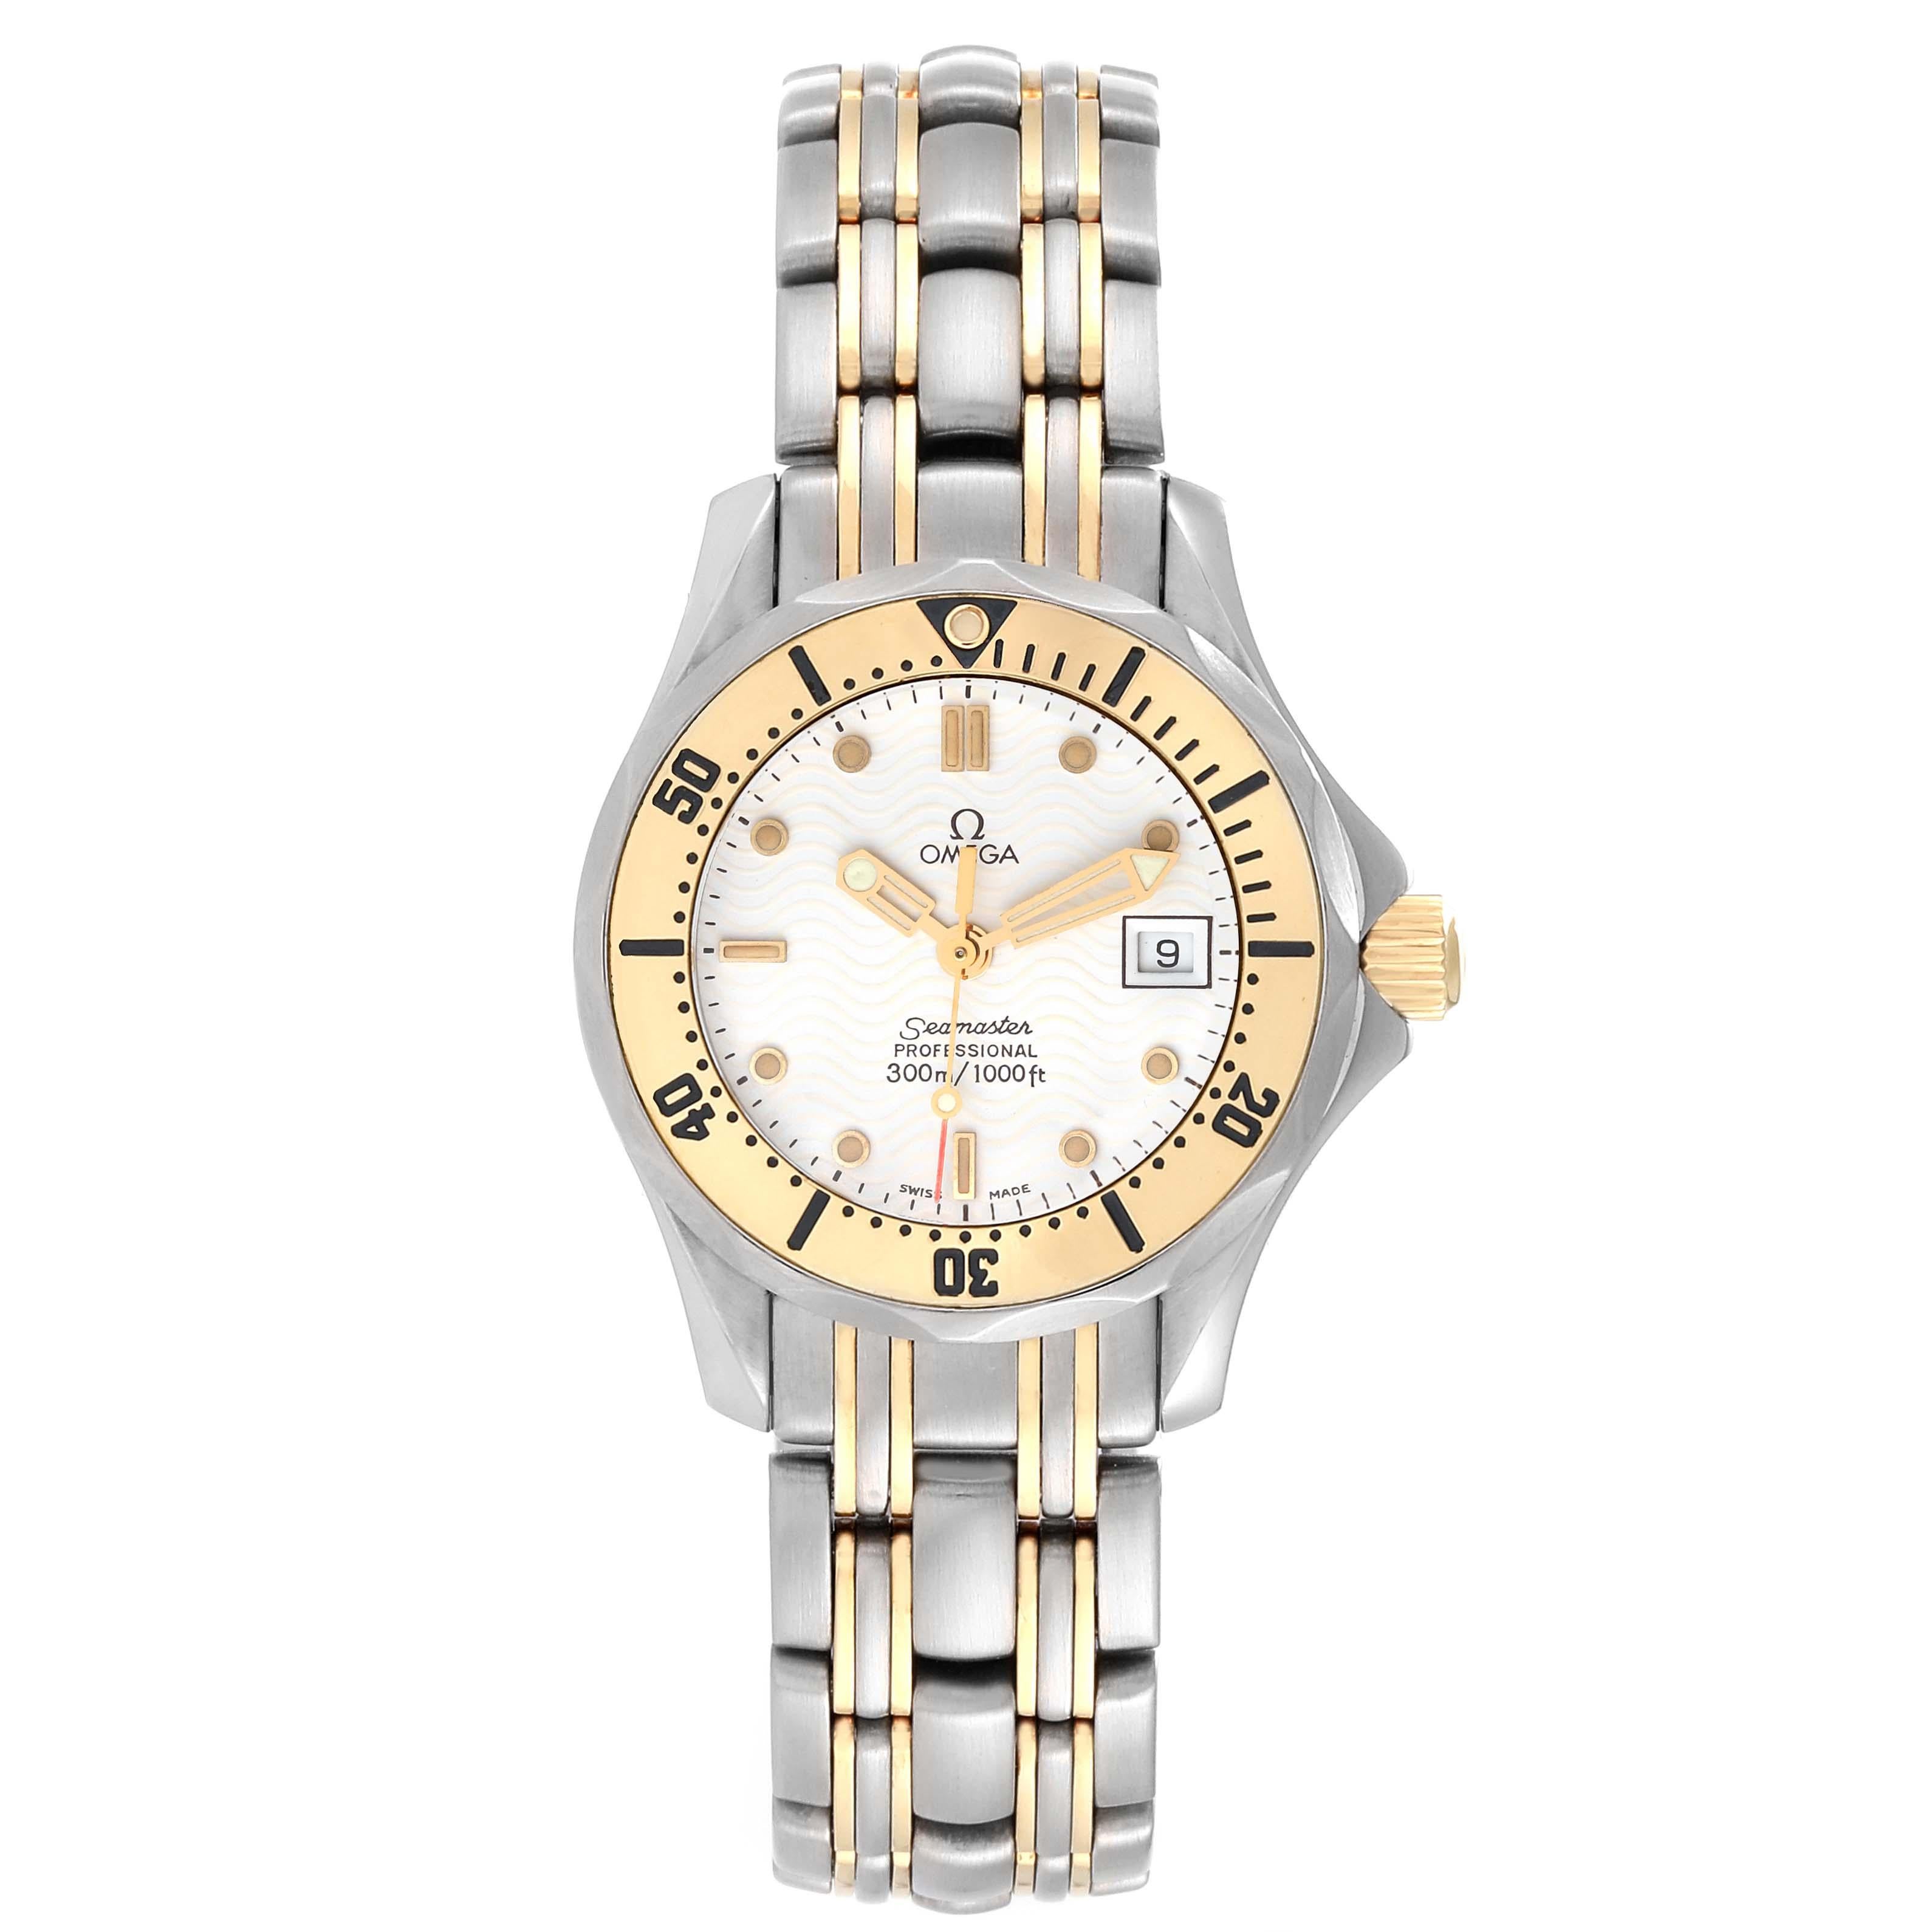 Omega Seamaster Diver Steel Yellow Gold Ladies Watch 2382.20.00 Box Card For Sale 1